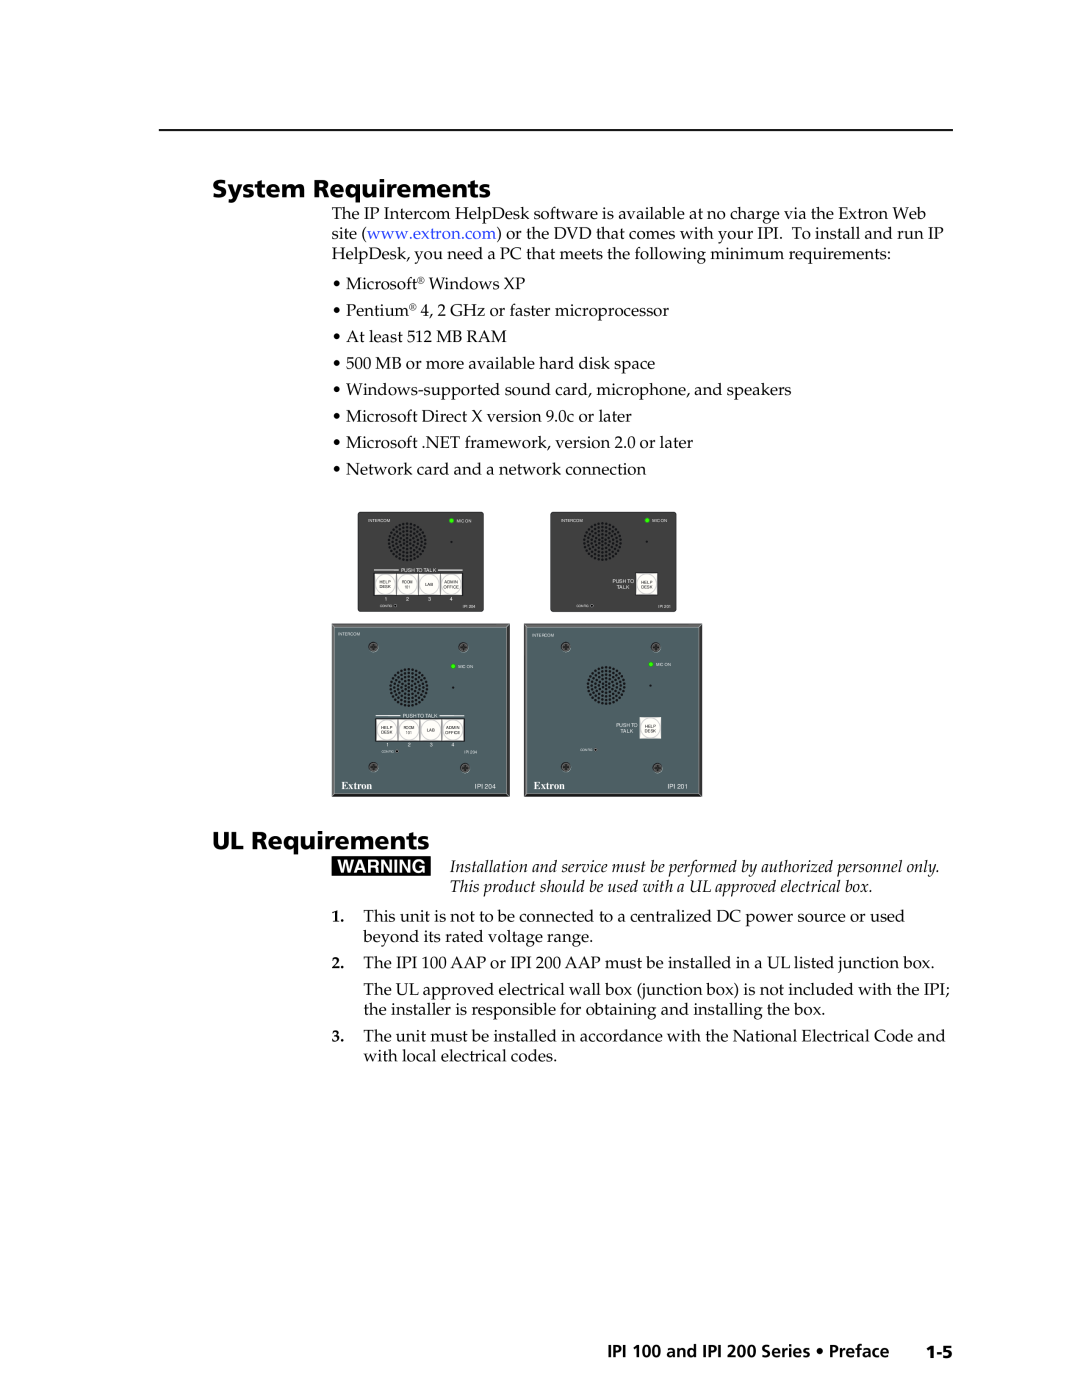 Extron electronic manual System Requirements, UL Requirements, IPI 100 and IPI 200 Series Preface 